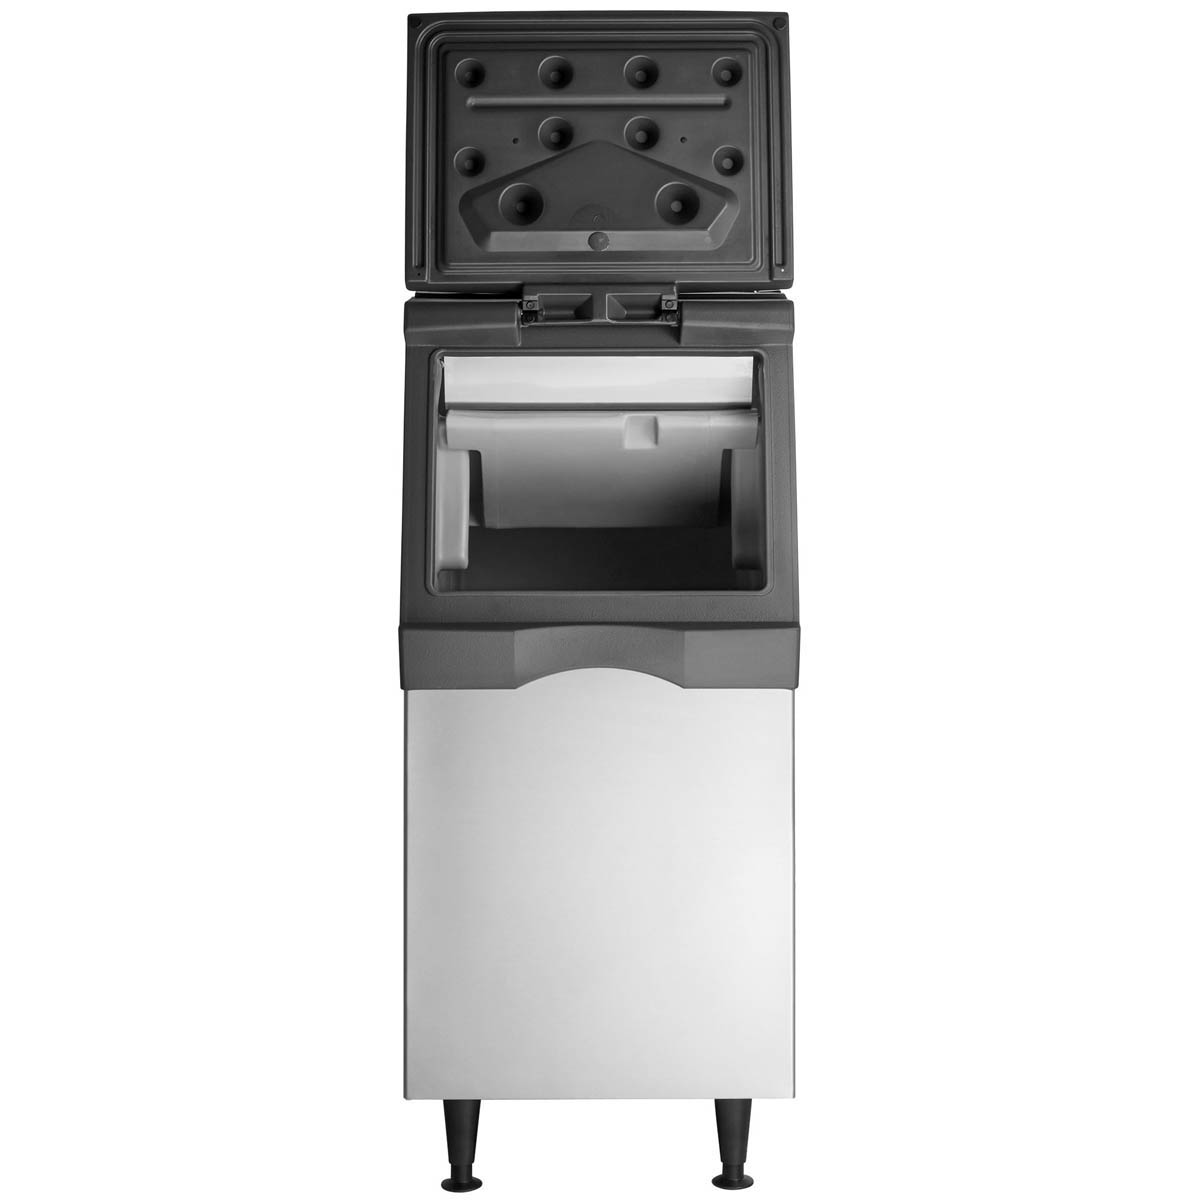 Scotsman B322S Is An Effective Way To Keep Your Ice Supply Cool and Available, Chef's Deal